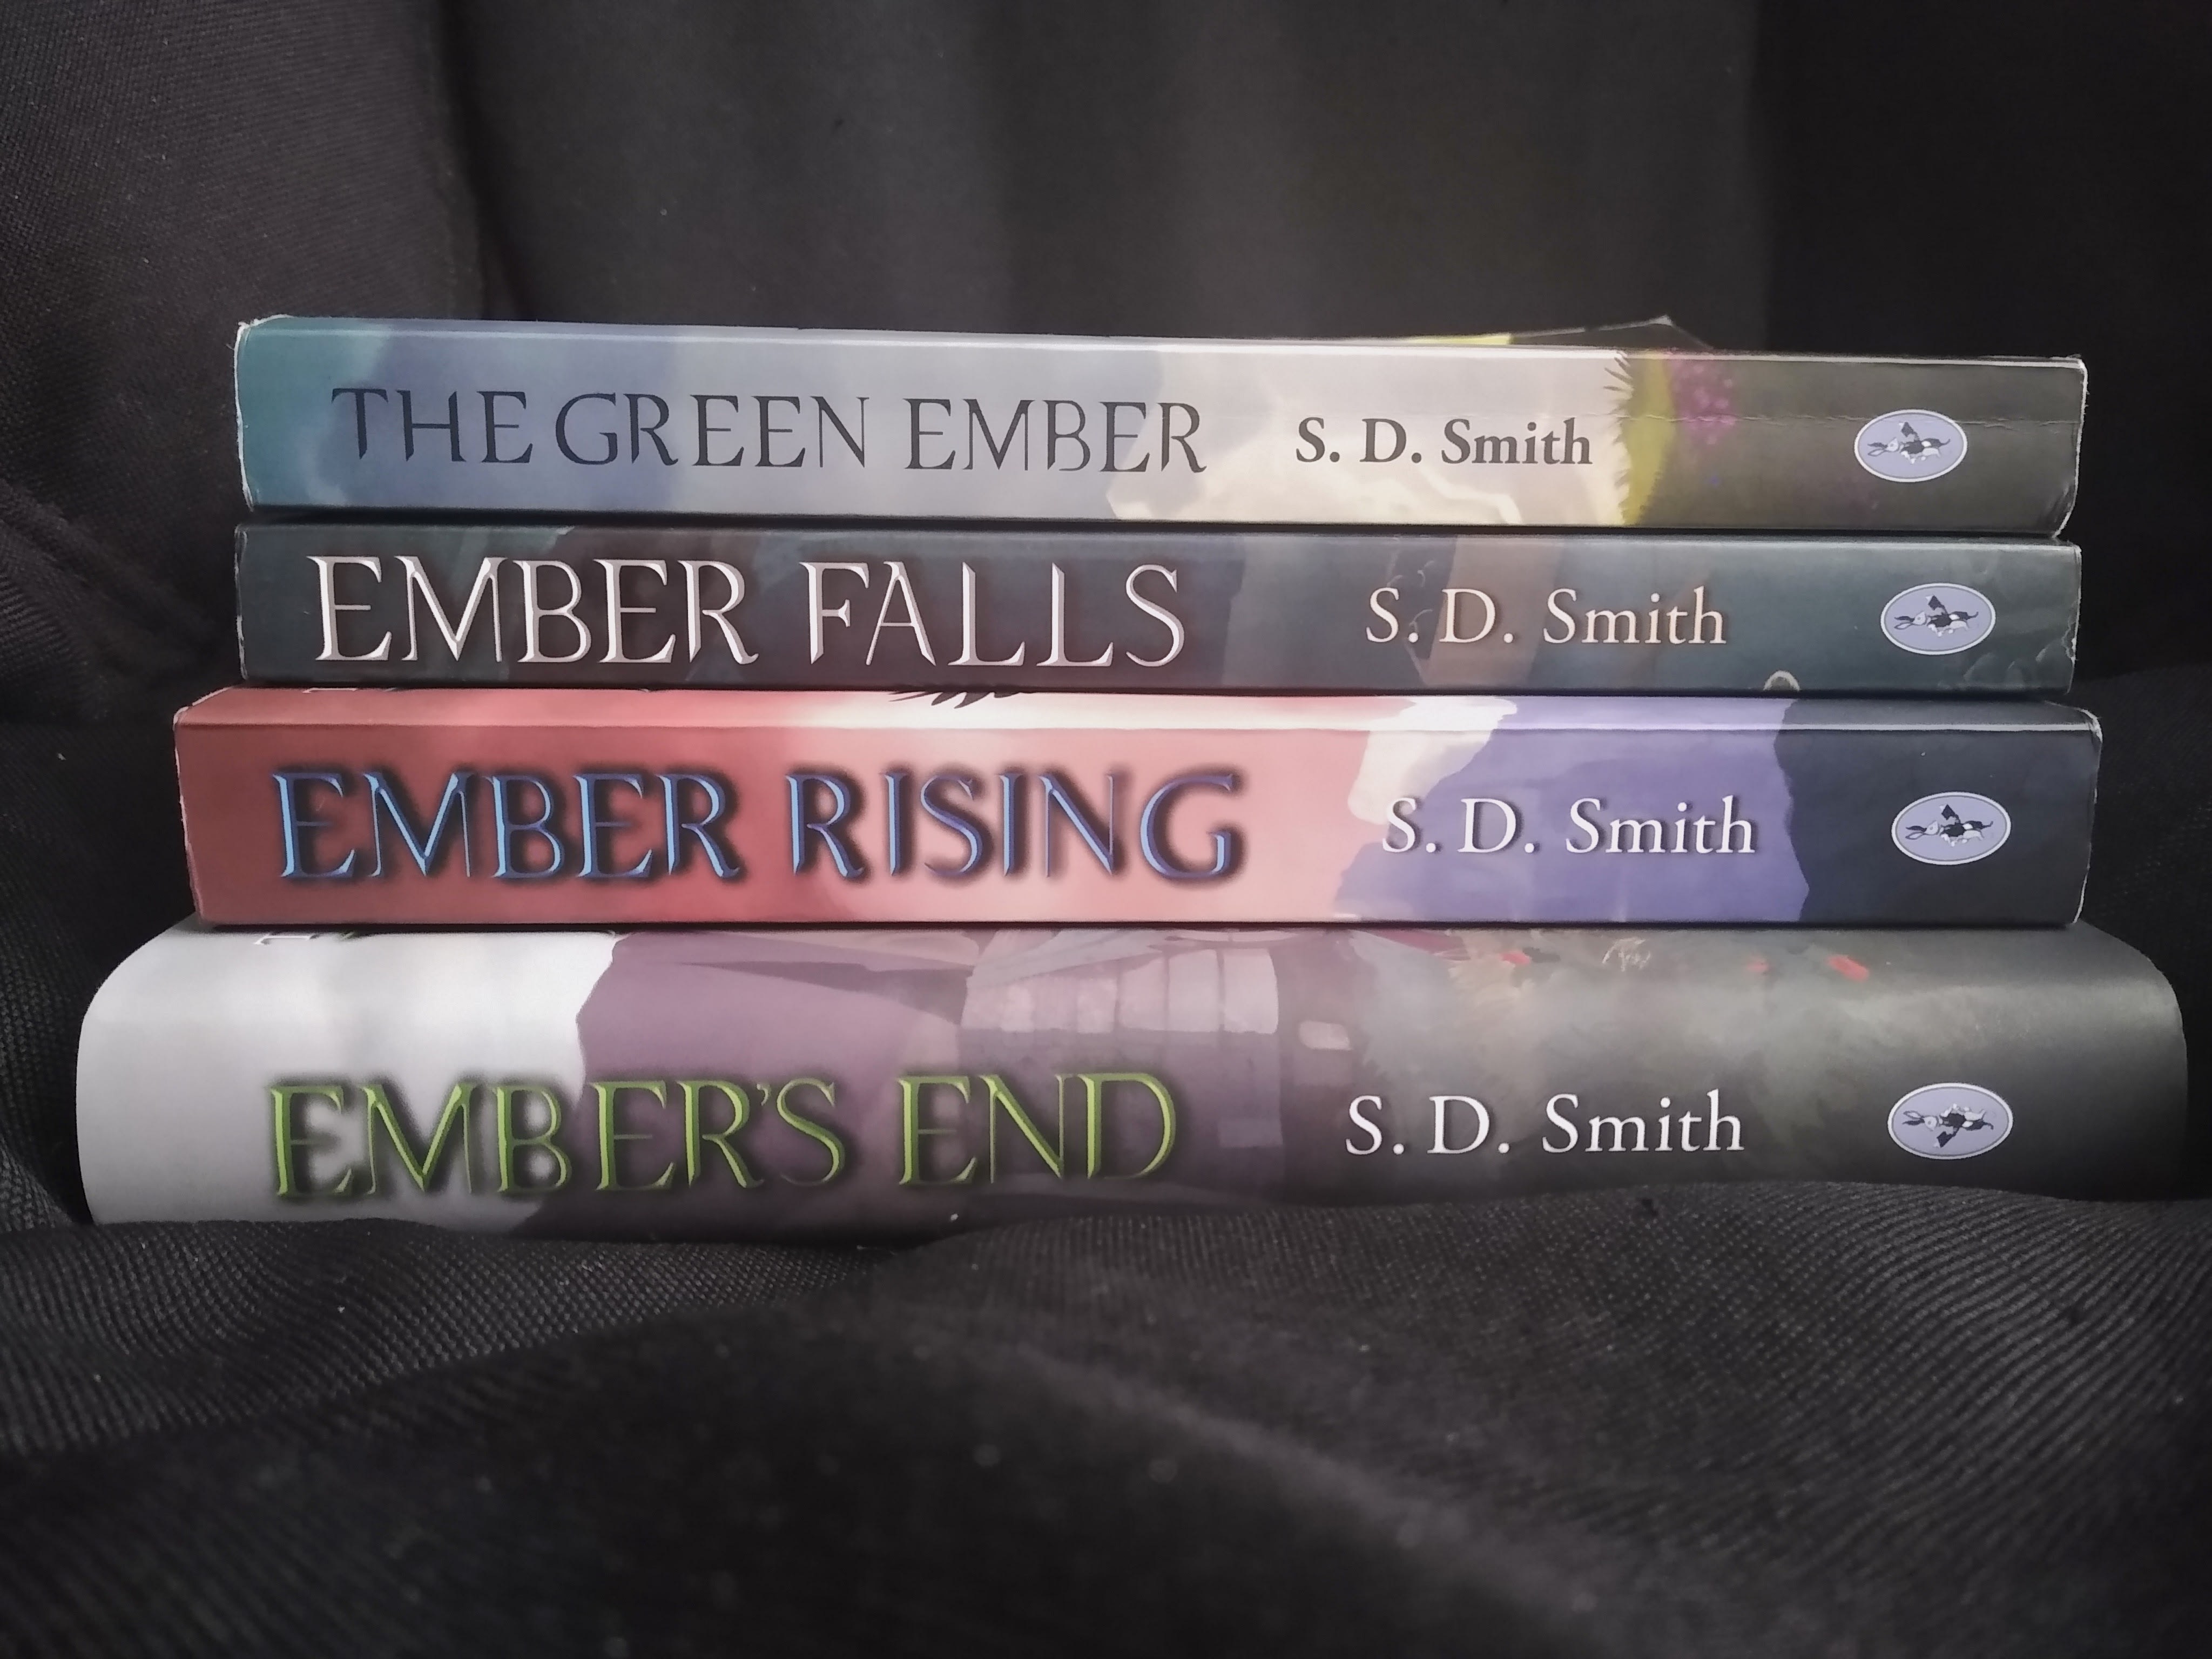 the green ember book series